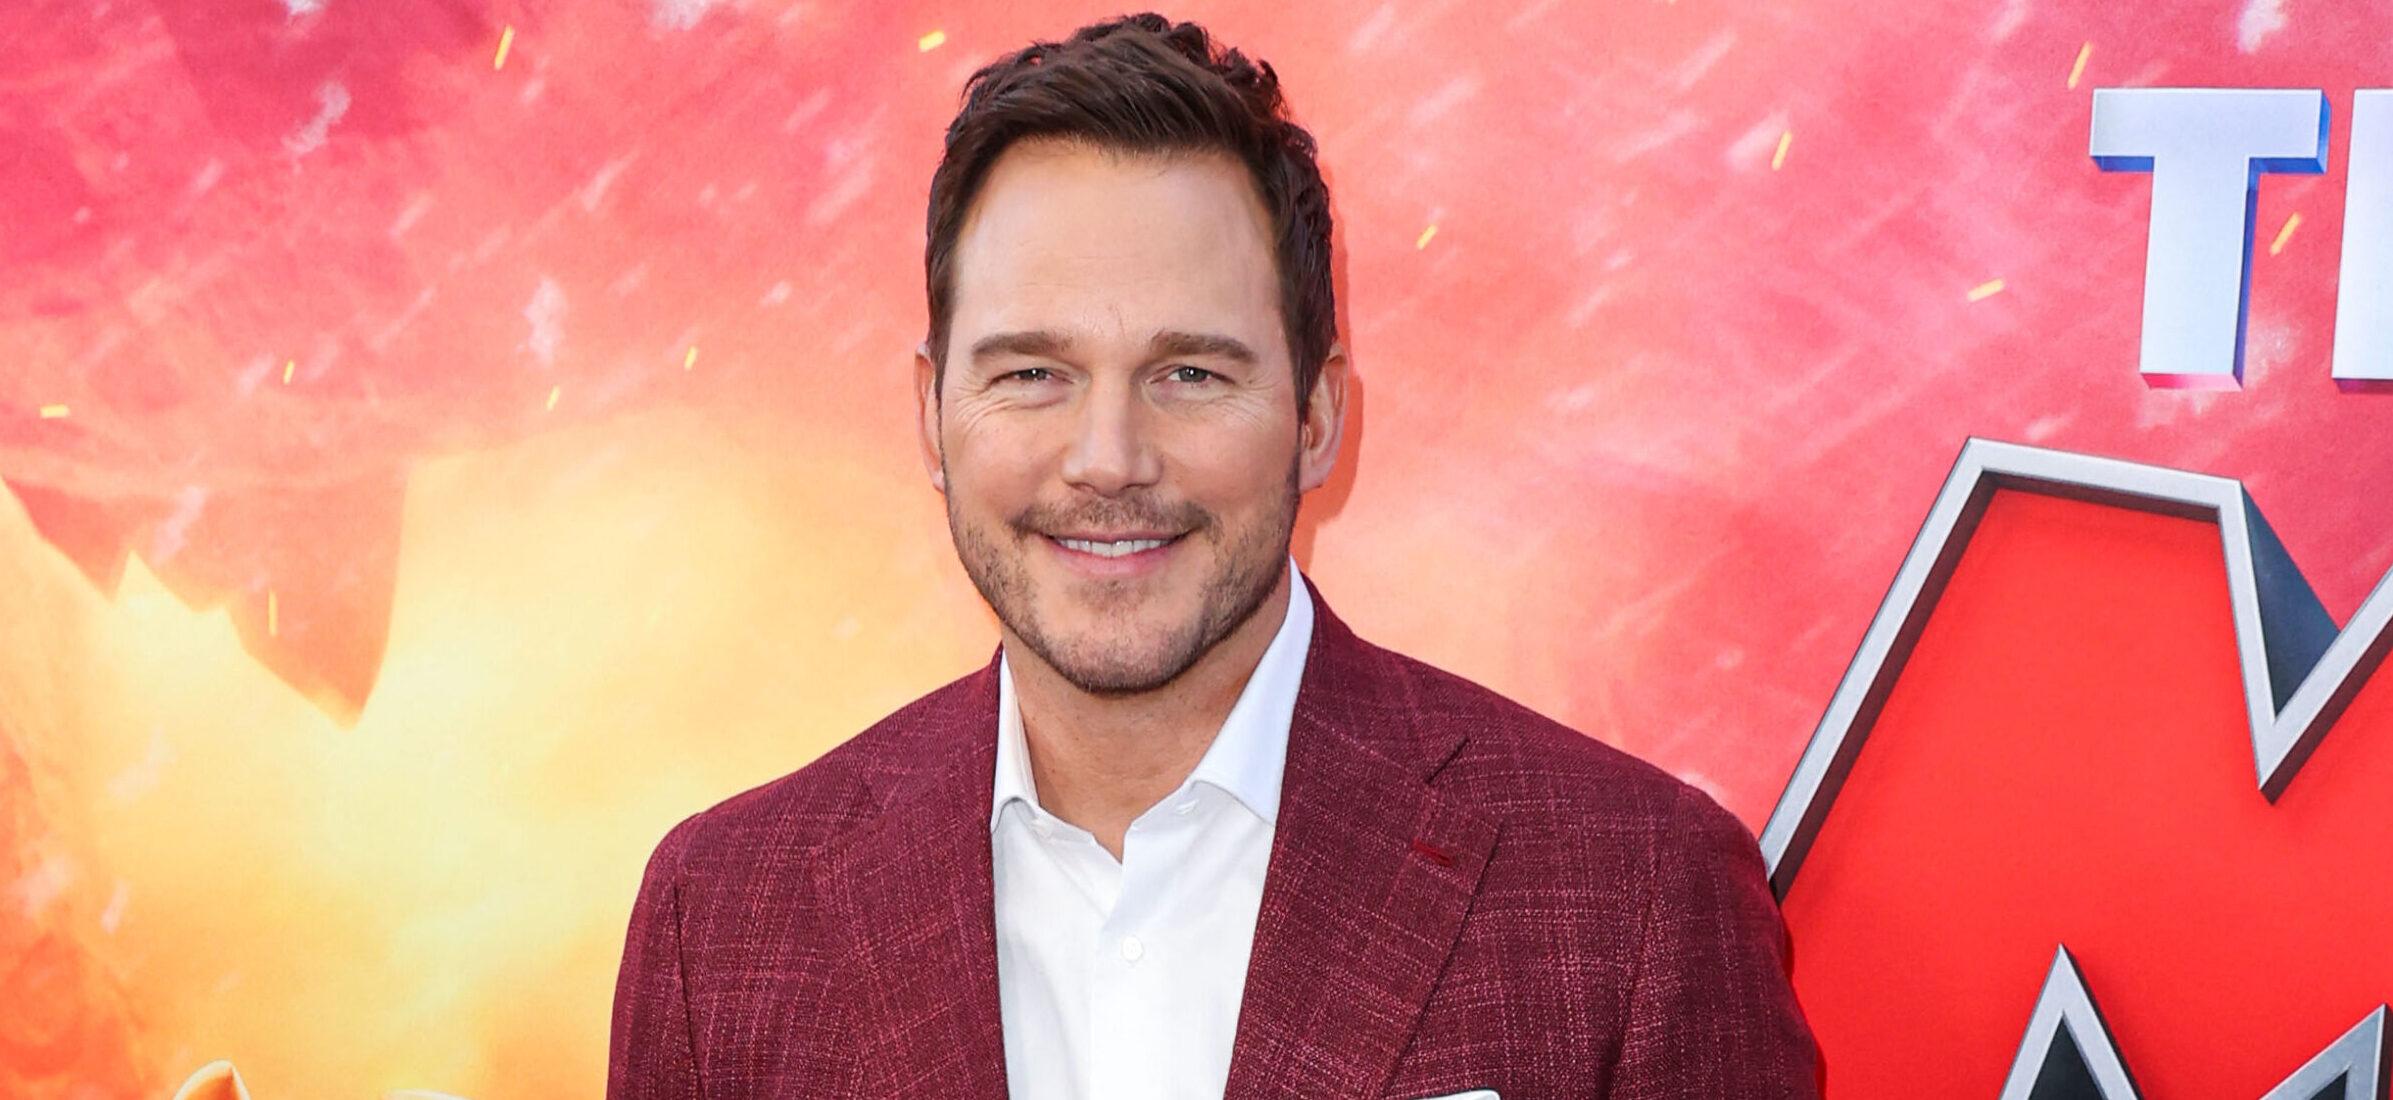 Chris Pratt References Jesus On Dealing With Haters: ‘2,000 Years Ago, They Hated Him Too’